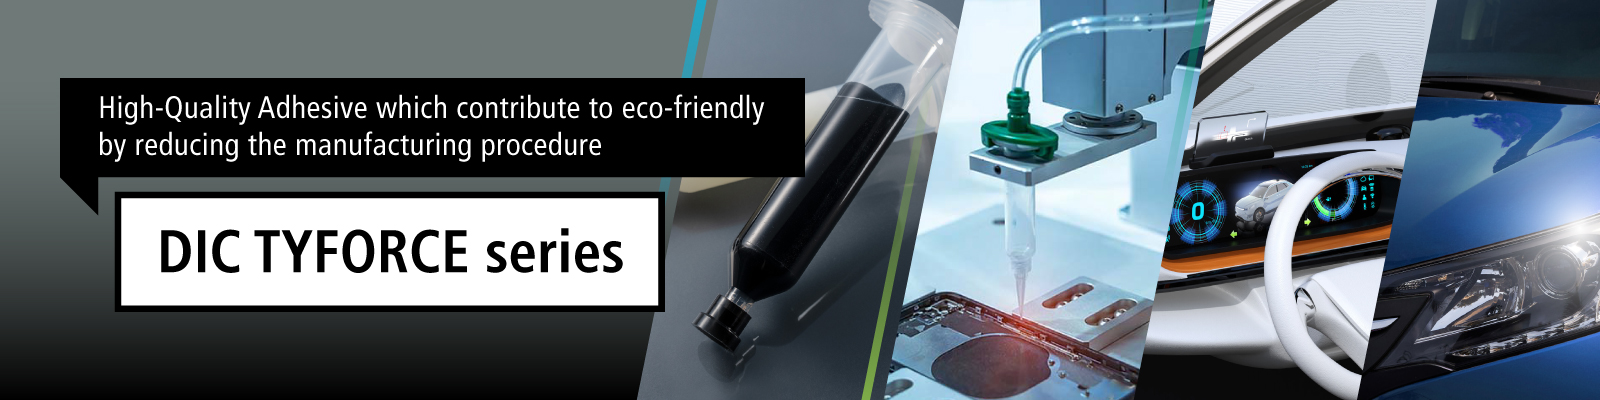 Adhesives that reduce CO2 emissions and Processes